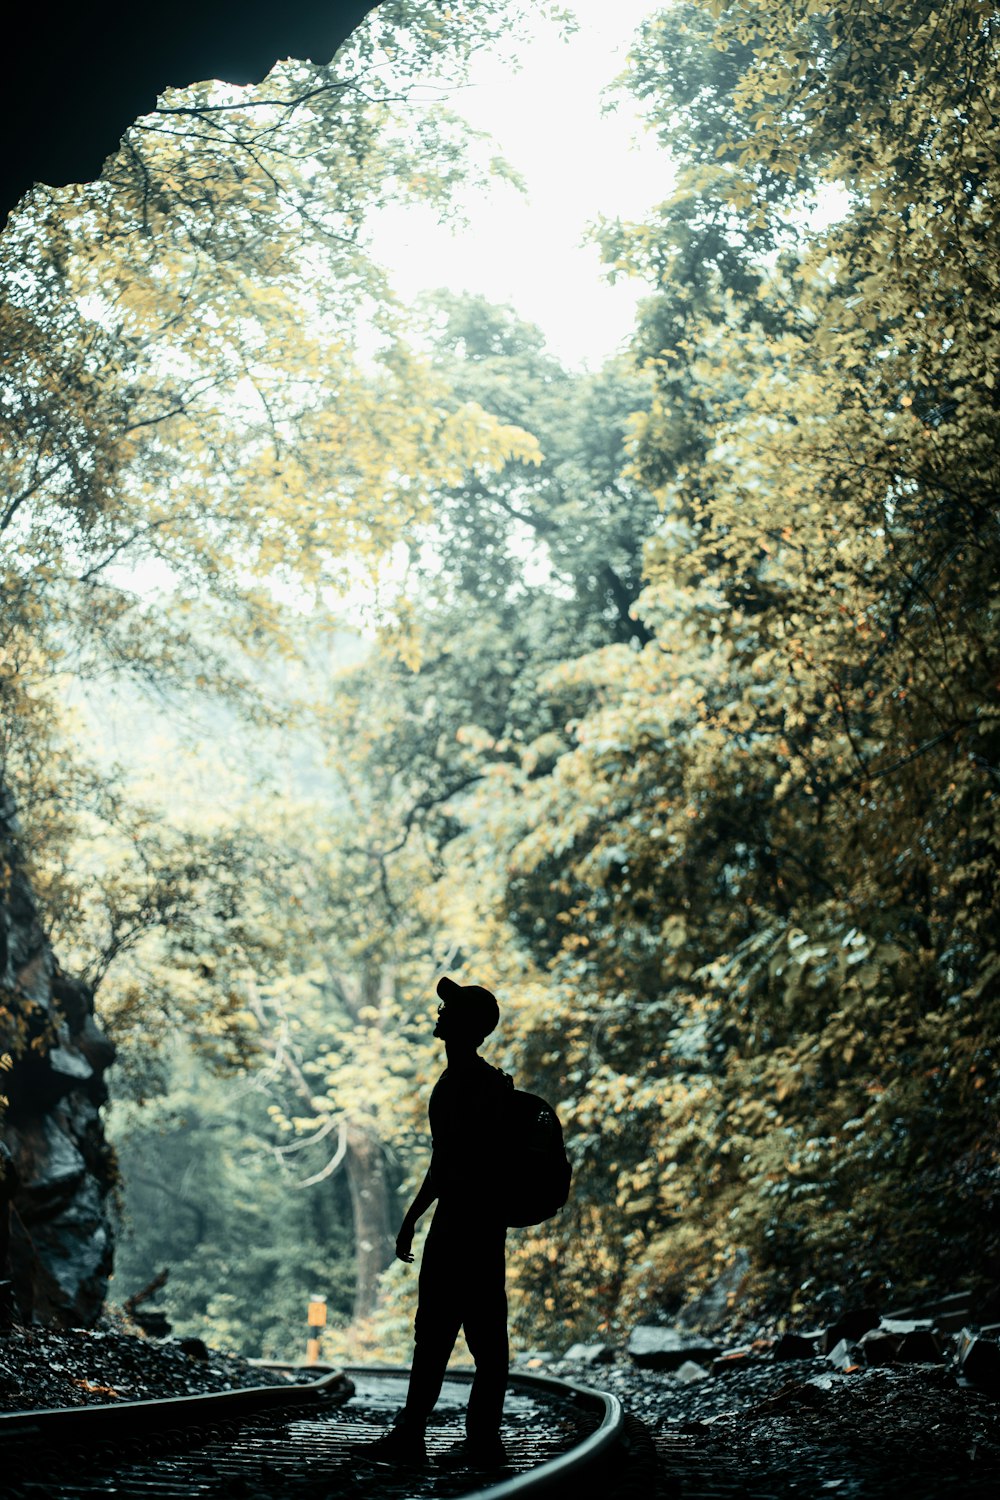 a person standing on a path surrounded by trees